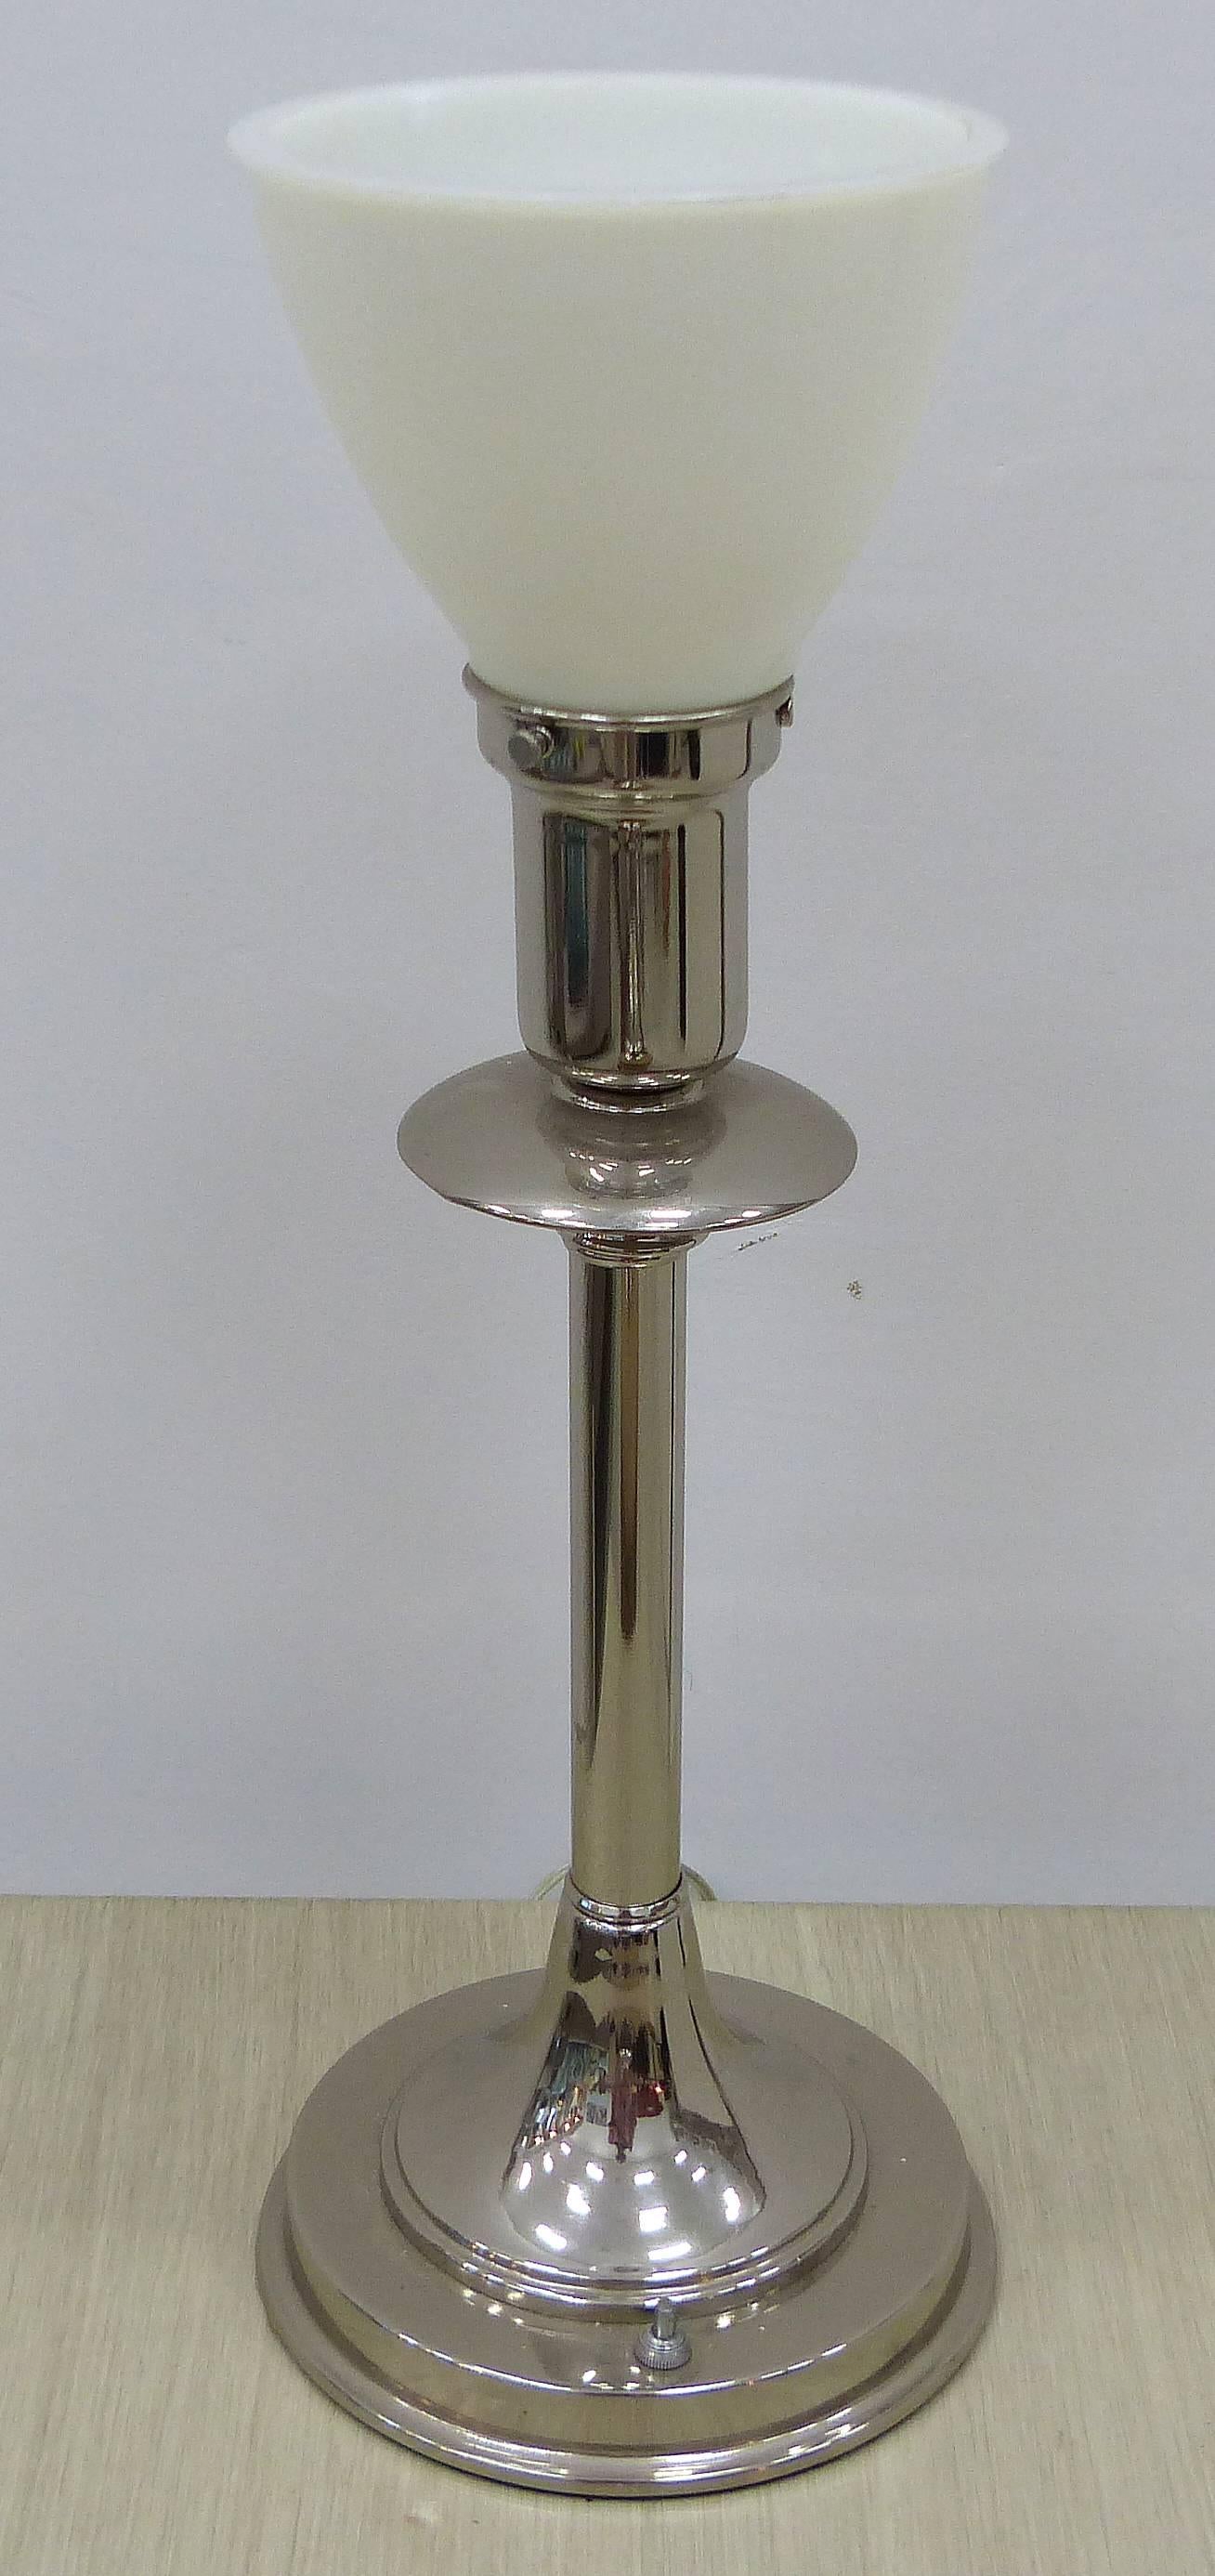 American Art Deco Markel Table or Desk Lamp

This large American Art Deco table lamp was made by the Markel Company of Buffalo, New York in the 1930s. The lamp, in brilliant nickel, has a stepped base, speed disks in the central shaft and a double